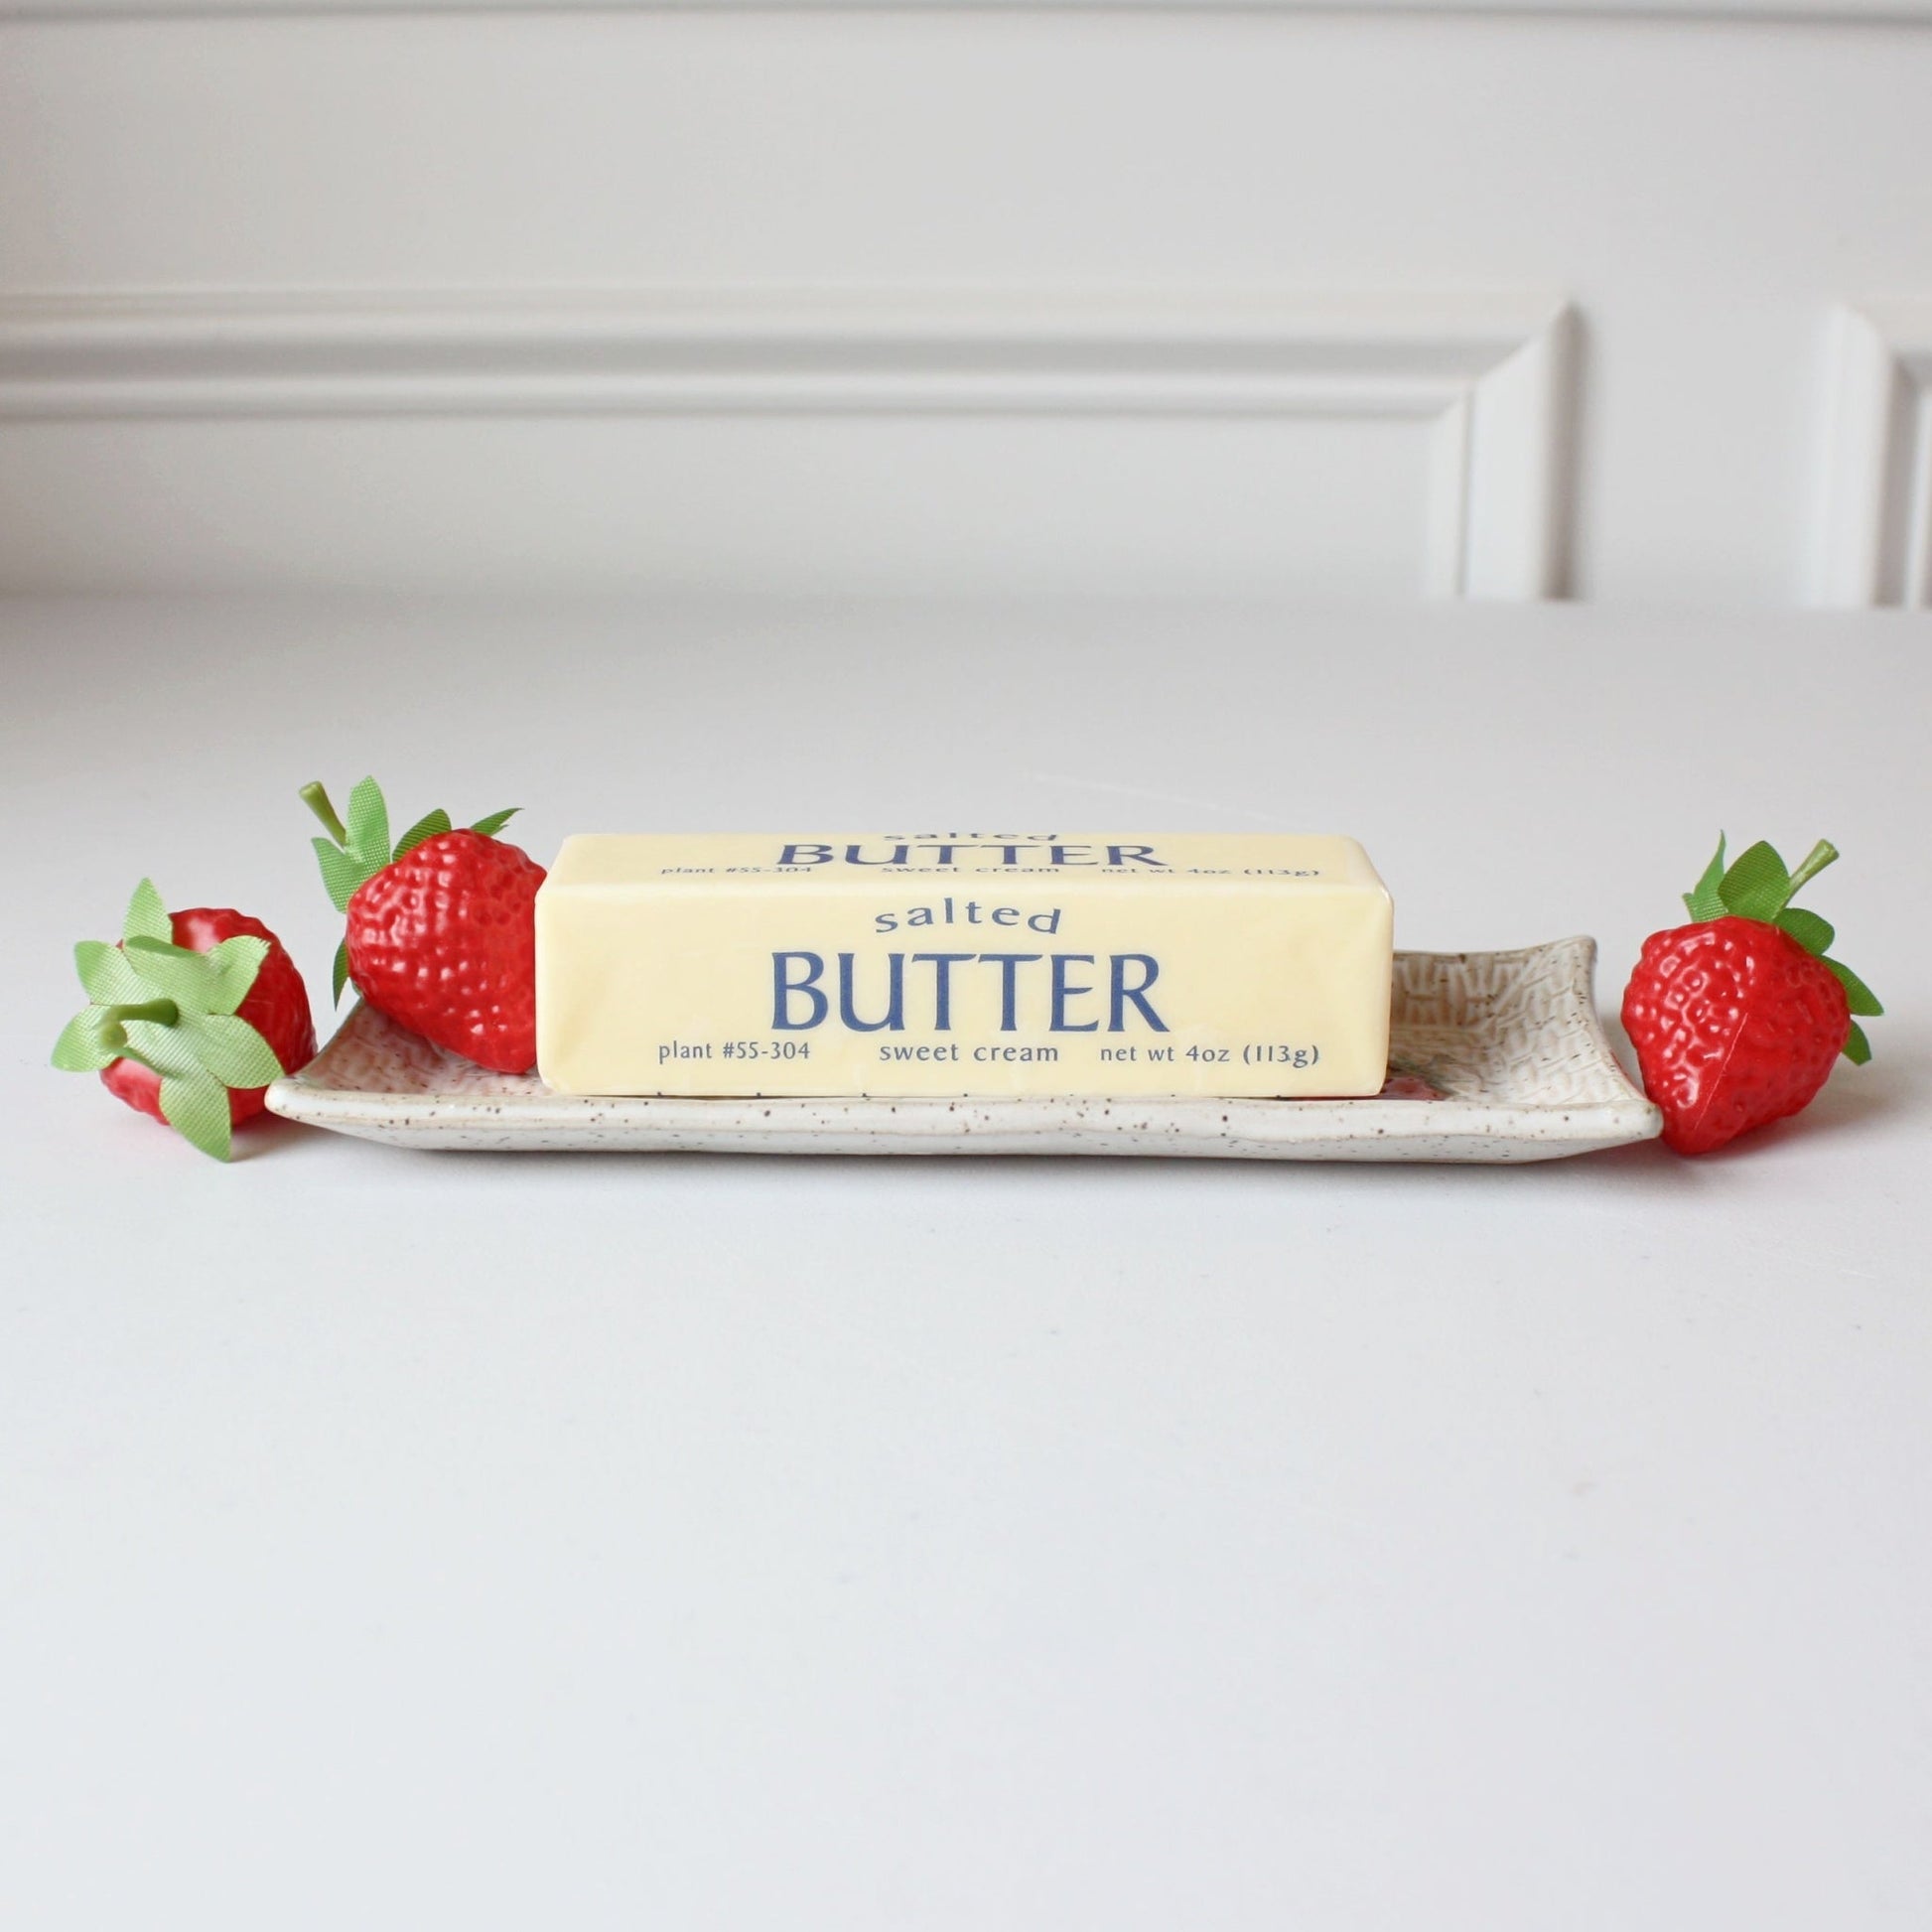 Strawberry Ceramic Butter Dish - Made in the USA